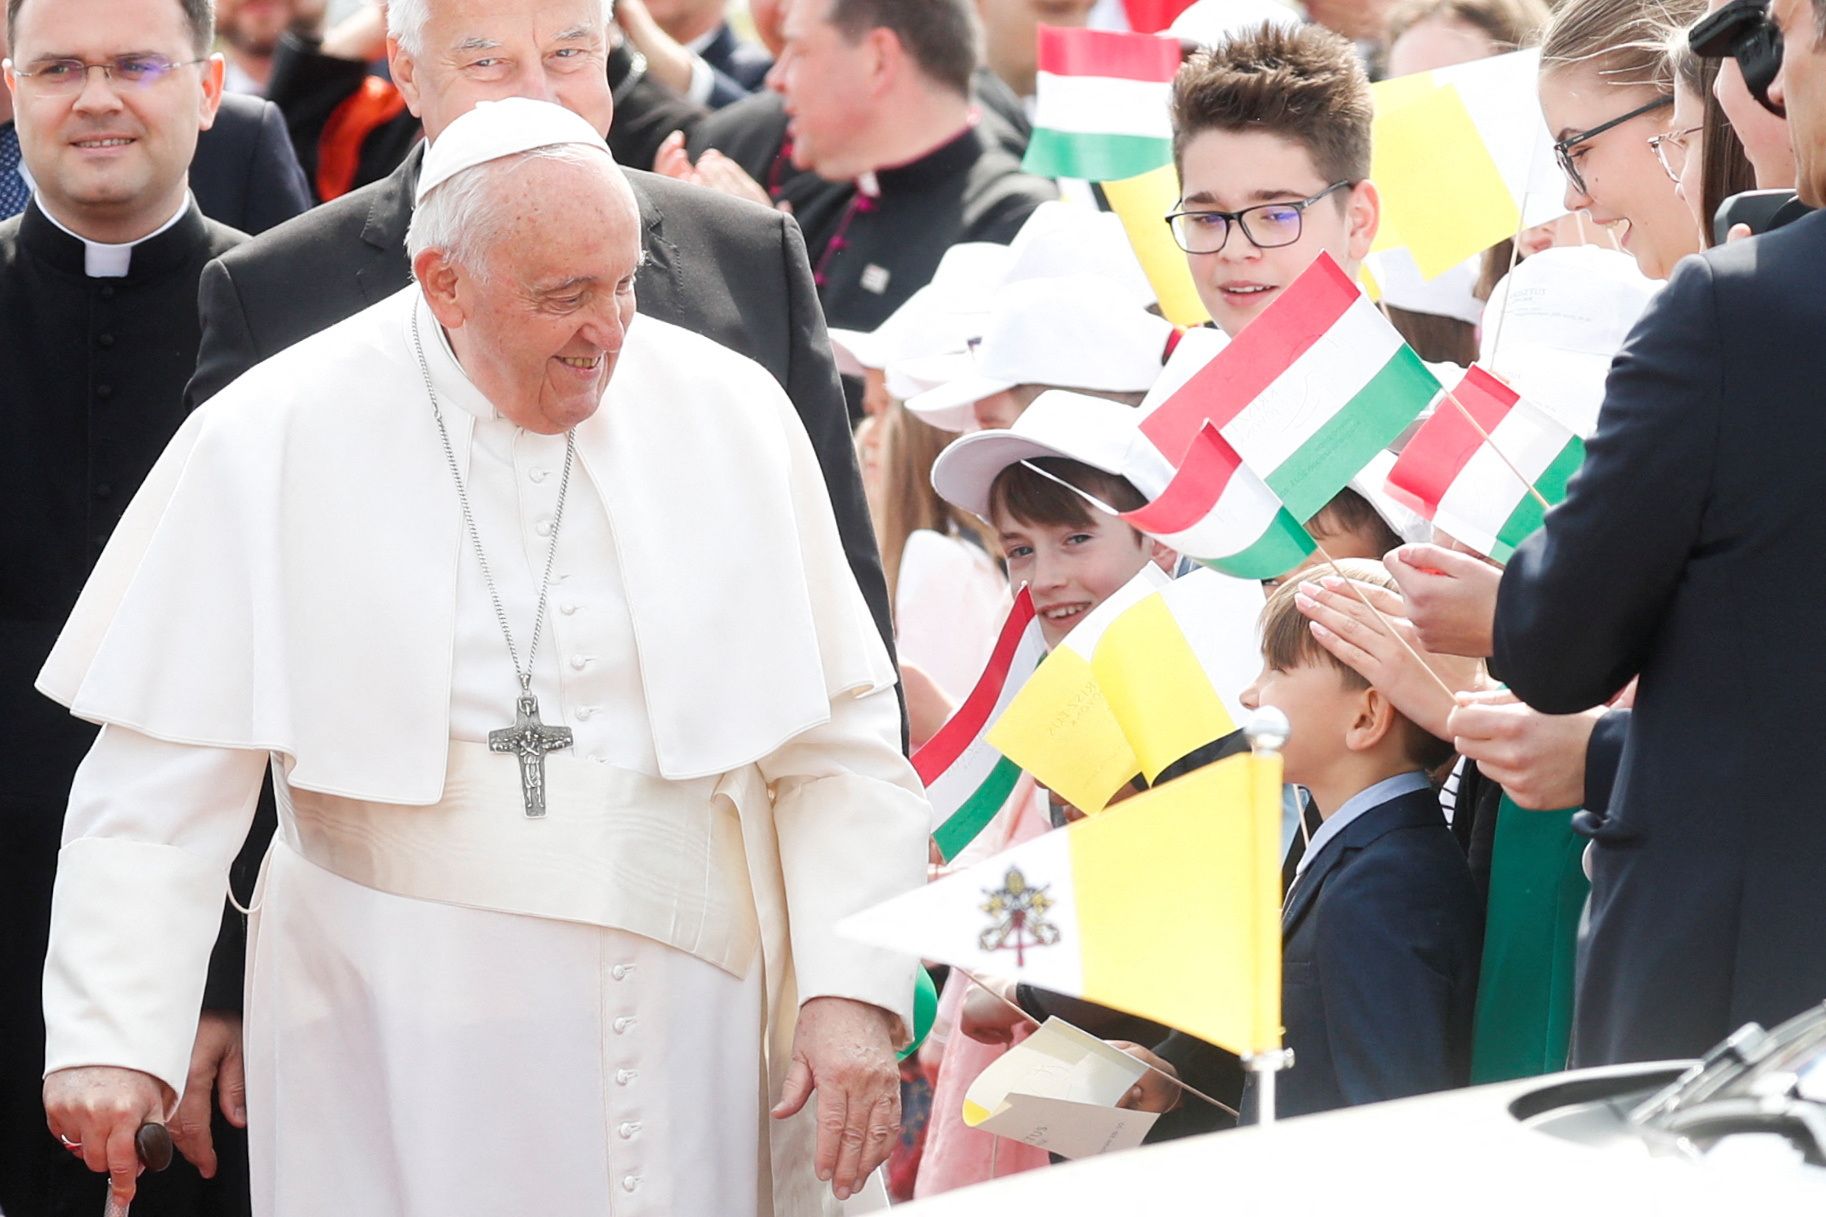 During his visit to Hungary, the Pope asked the government to open up to people of different cultures